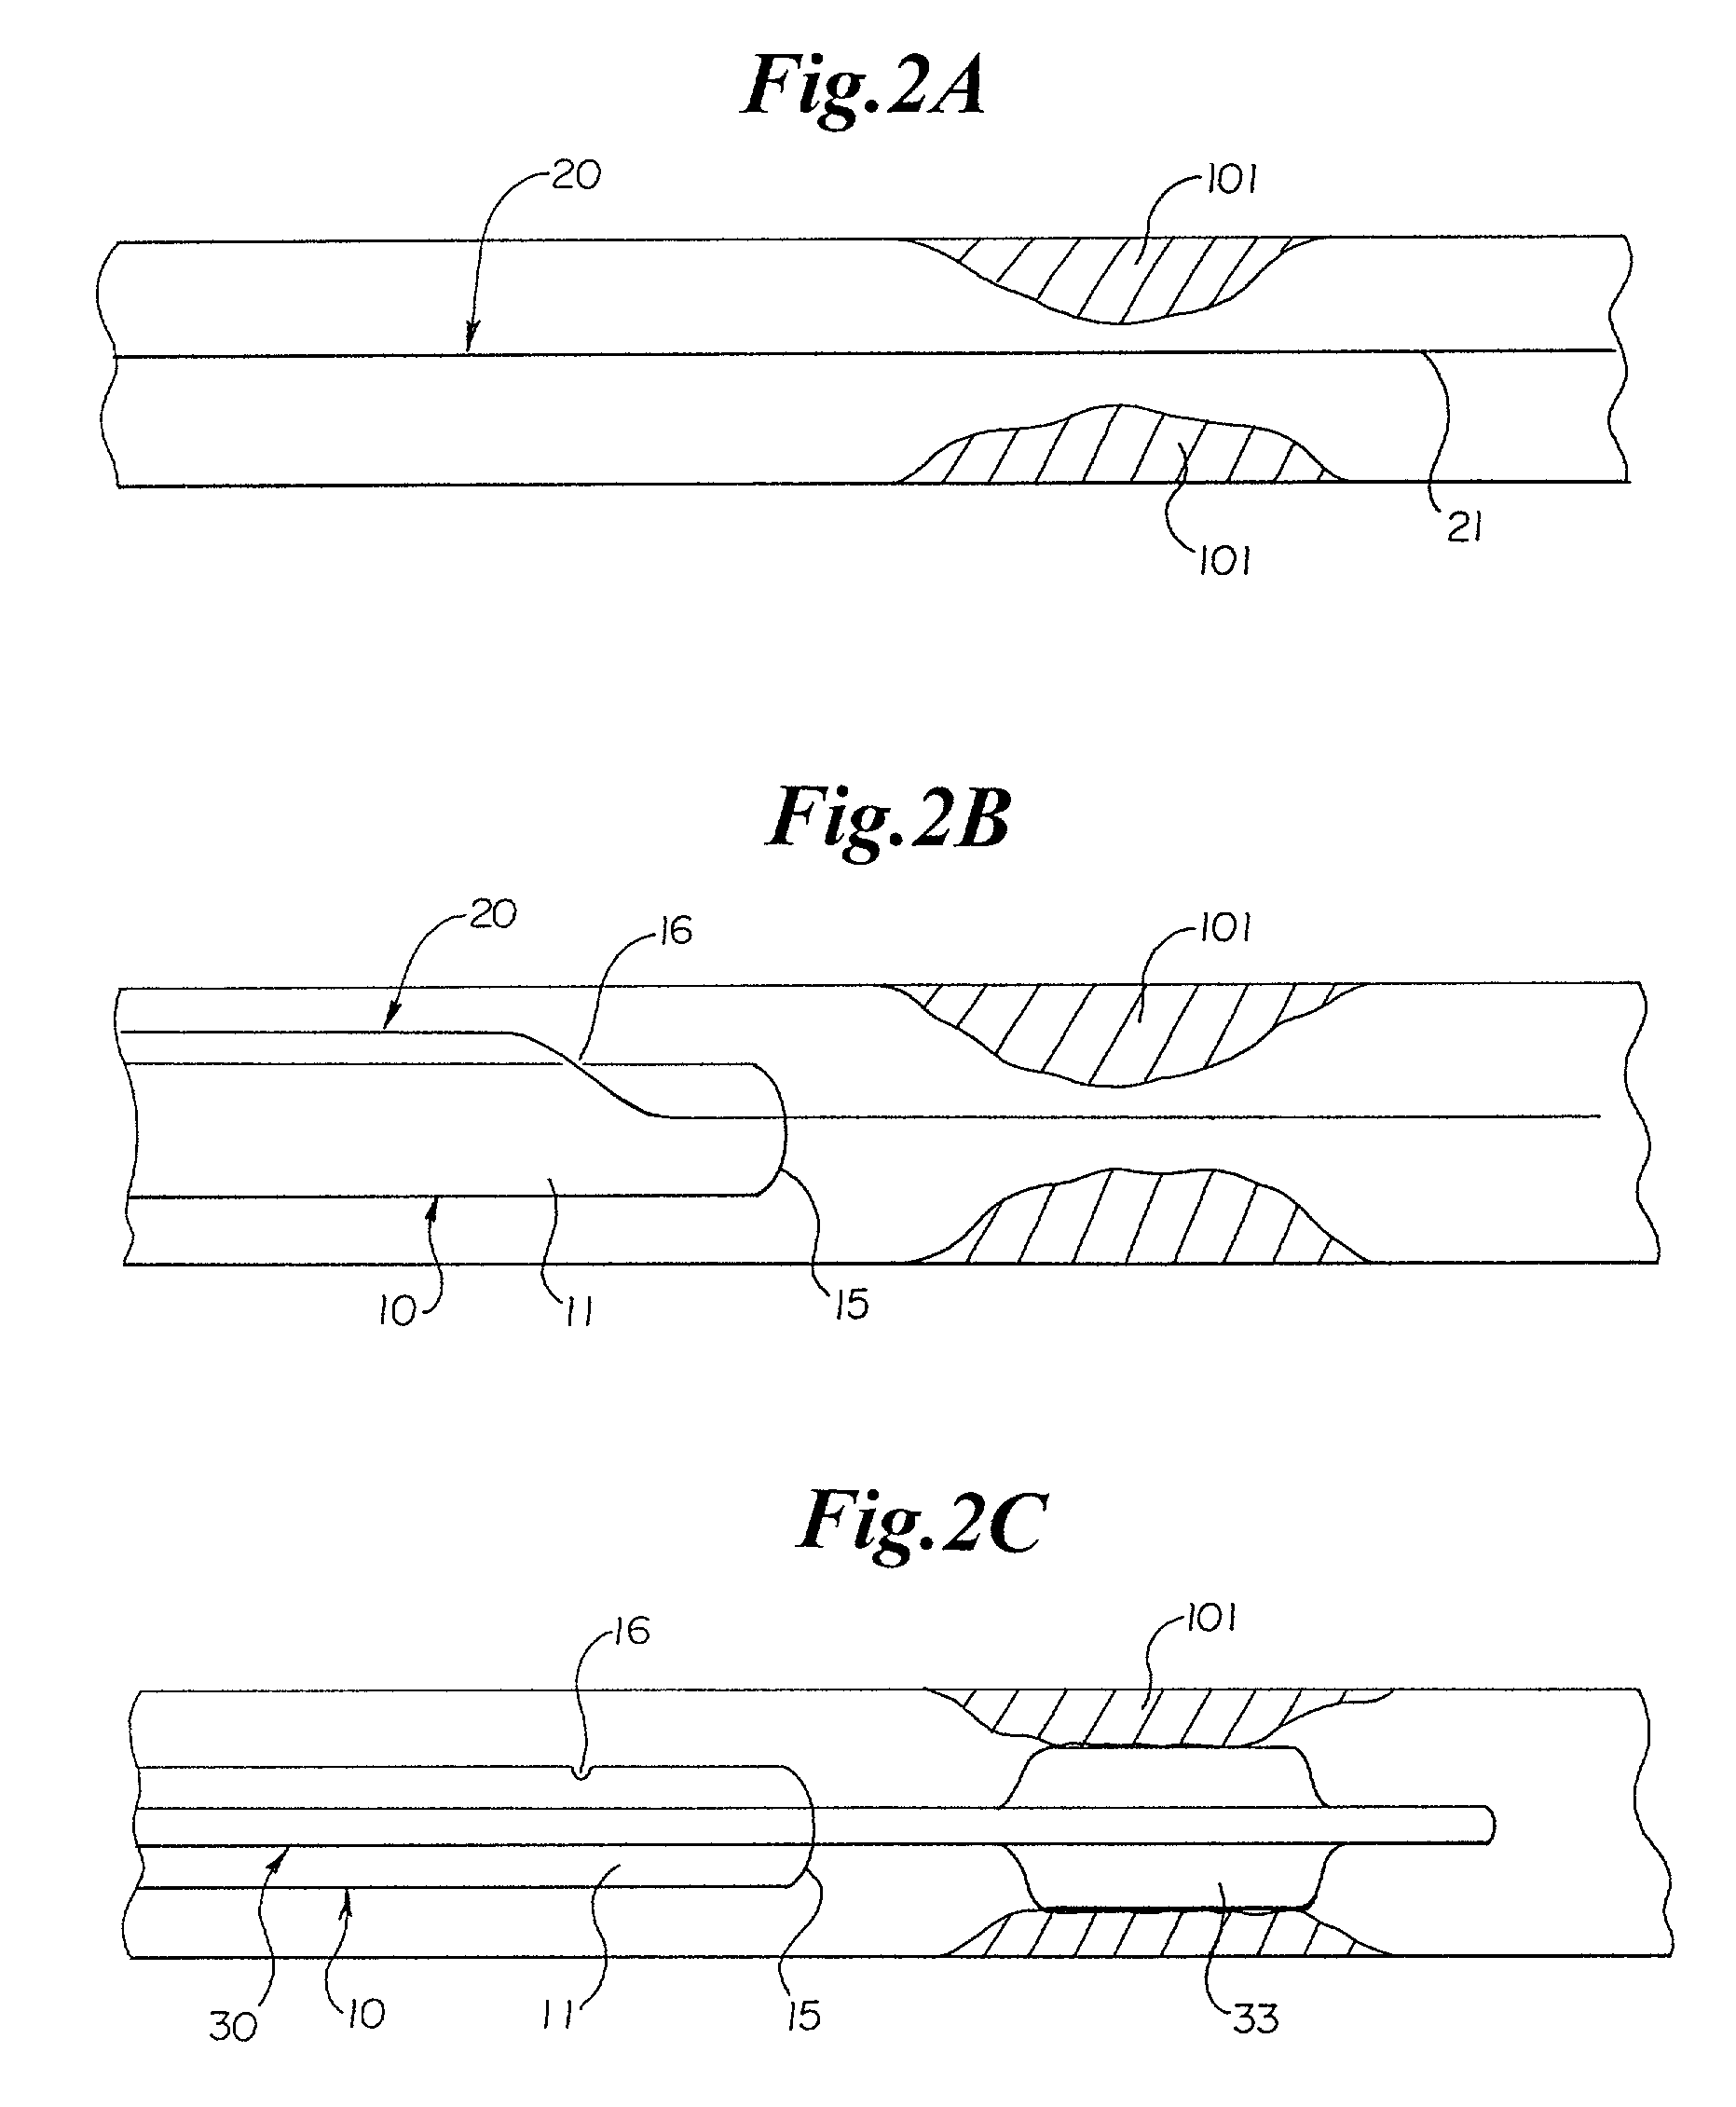 Rapid exchange sheath for deployment of medical devices and methods of use